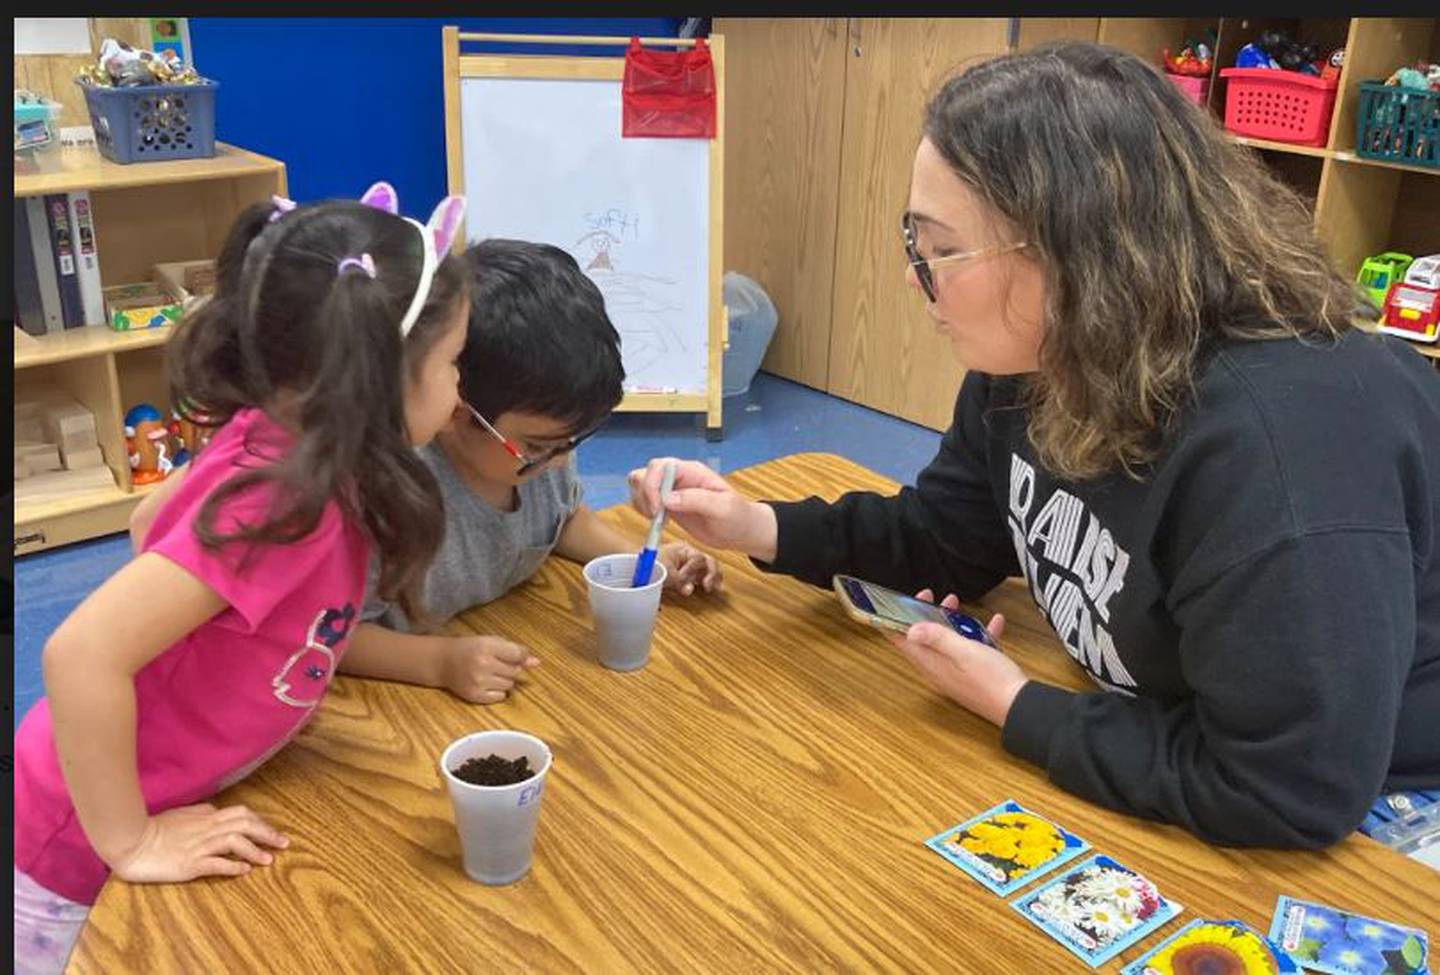 Jennamarie Lopez, a teacher at Minooka School District 201's multilingual program, works with her pre-K students, Elliot and Elany on planting their own flowers as part of their early childhood unit on spring.